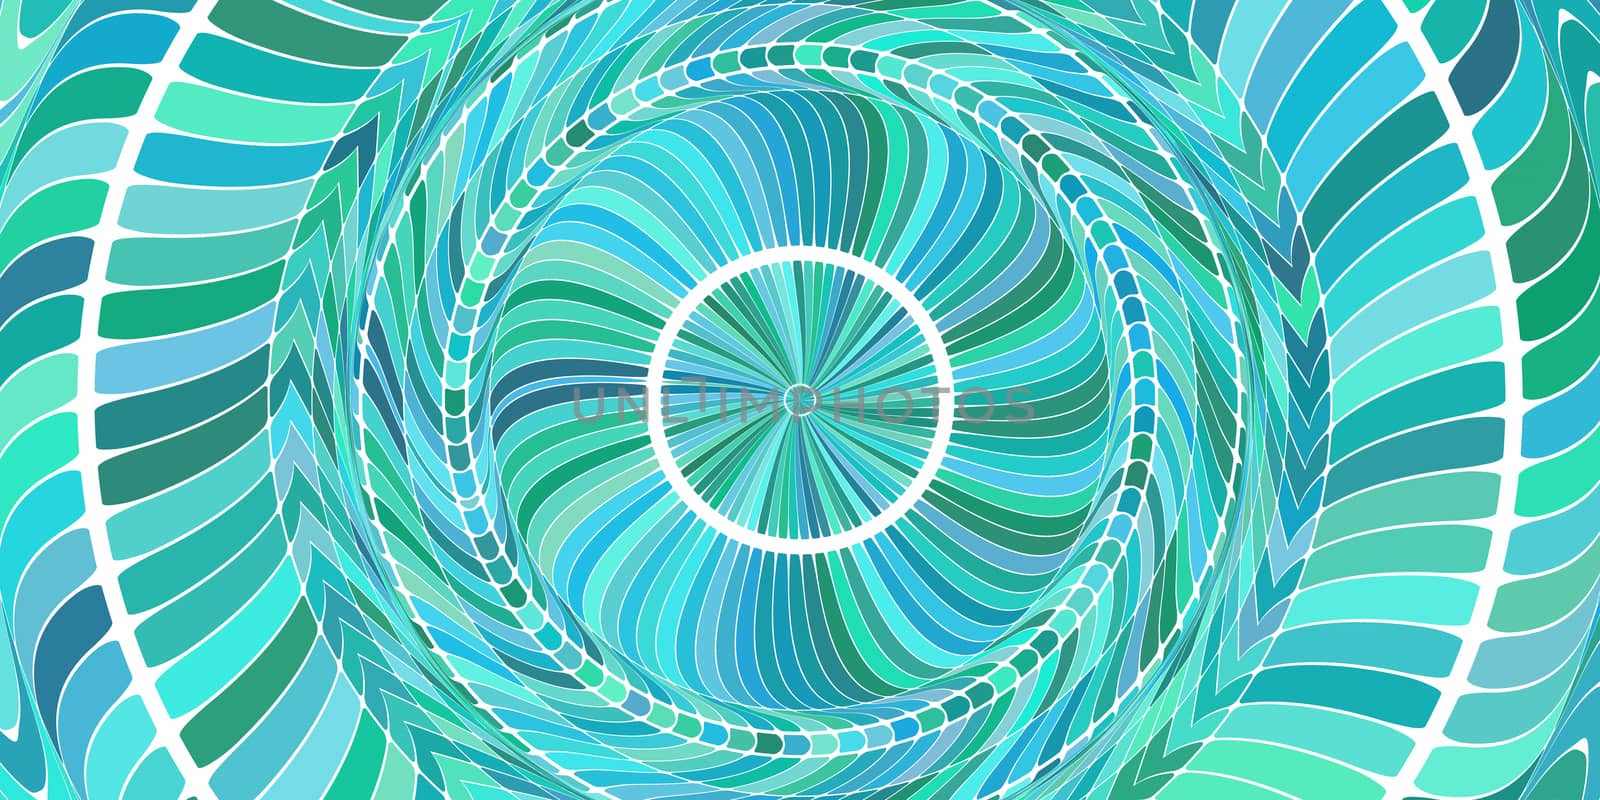 Turquoise Circles Art Action Background. Round Wheel Rhythm Backdrop. Center Concept. by sanches812